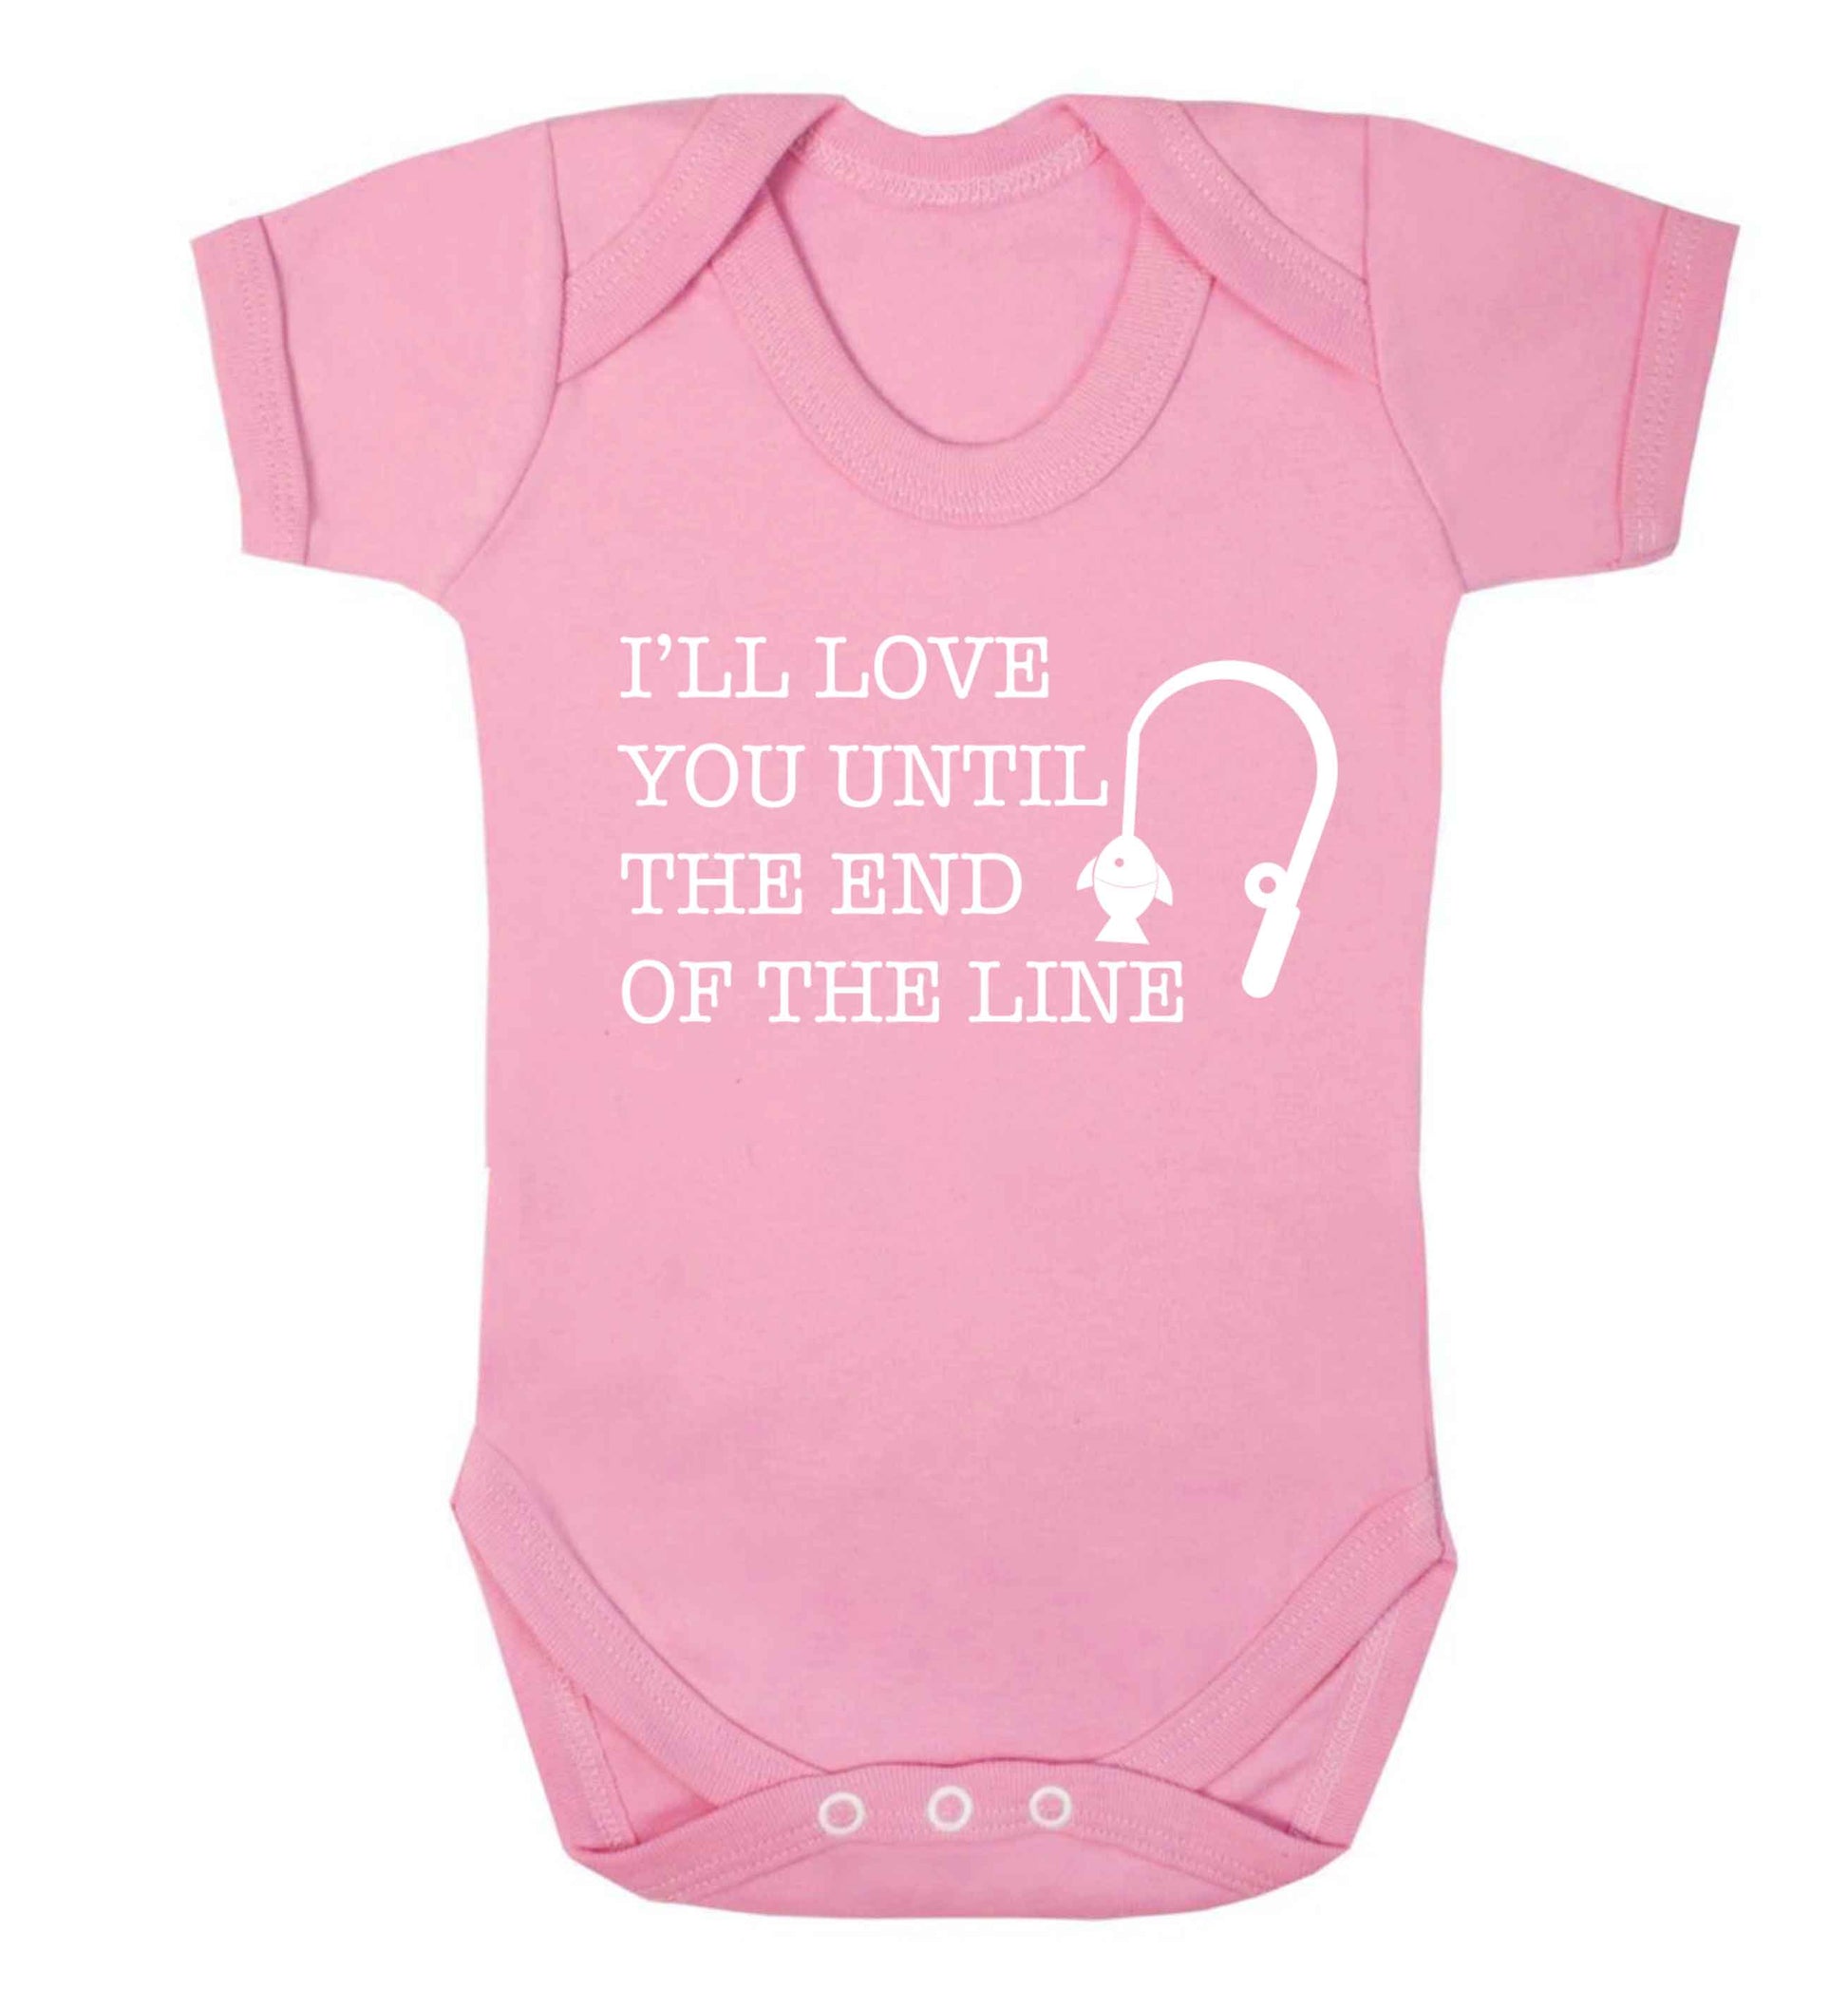 I'll love you until the end of the line Baby Vest pale pink 18-24 months